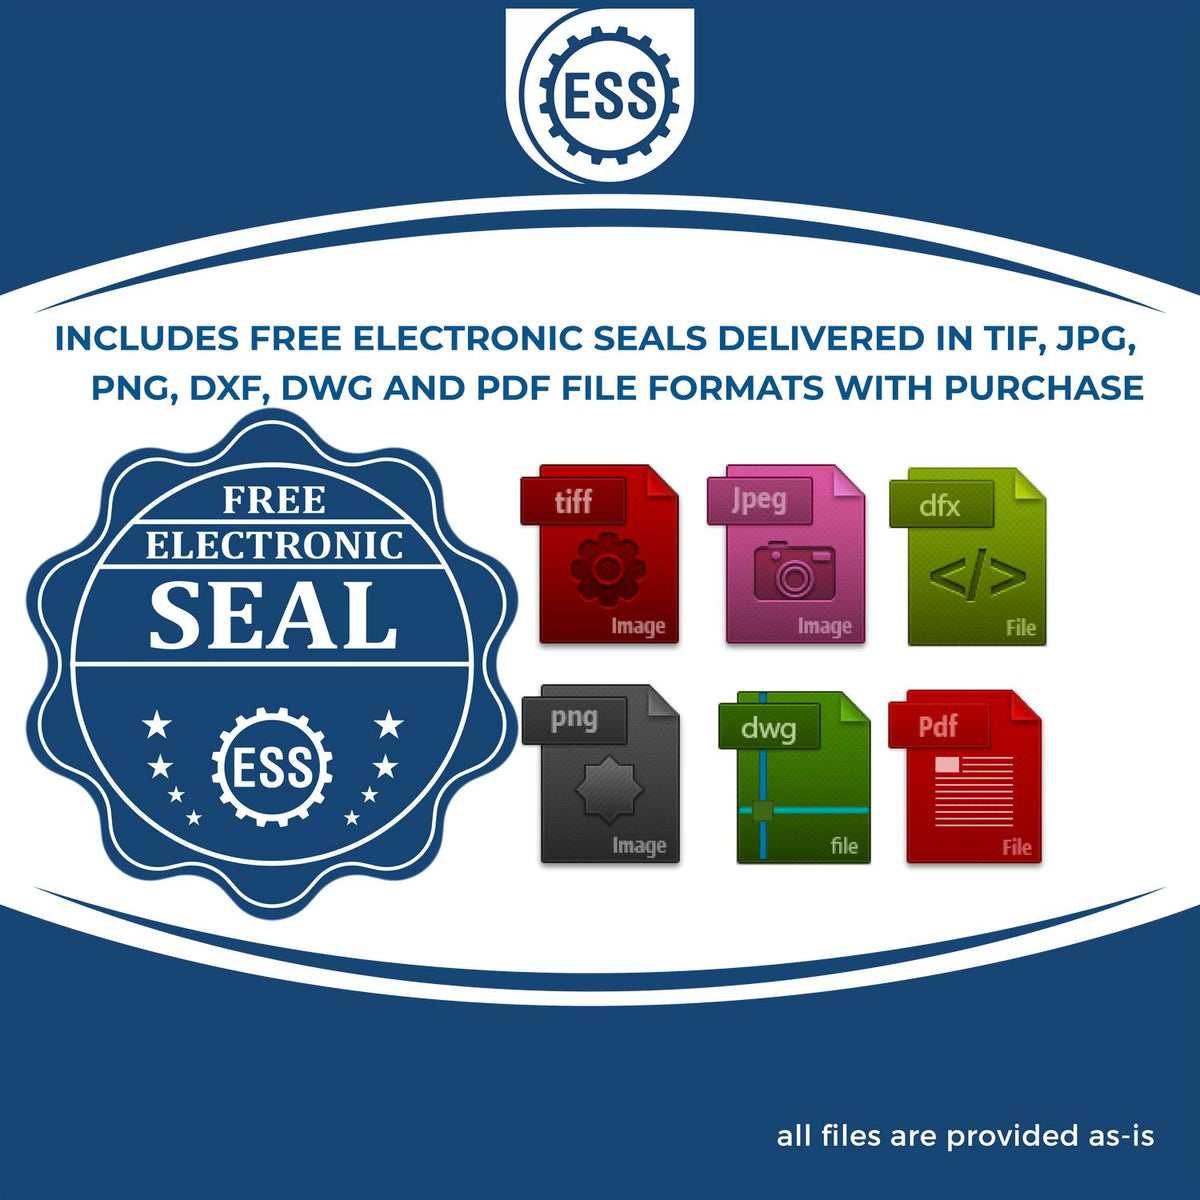 An infographic for the free electronic seal for the Heavy Duty Cast Iron North Carolina Engineer Seal Embosser illustrating the different file type icons such as DXF, DWG, TIF, JPG and PNG.